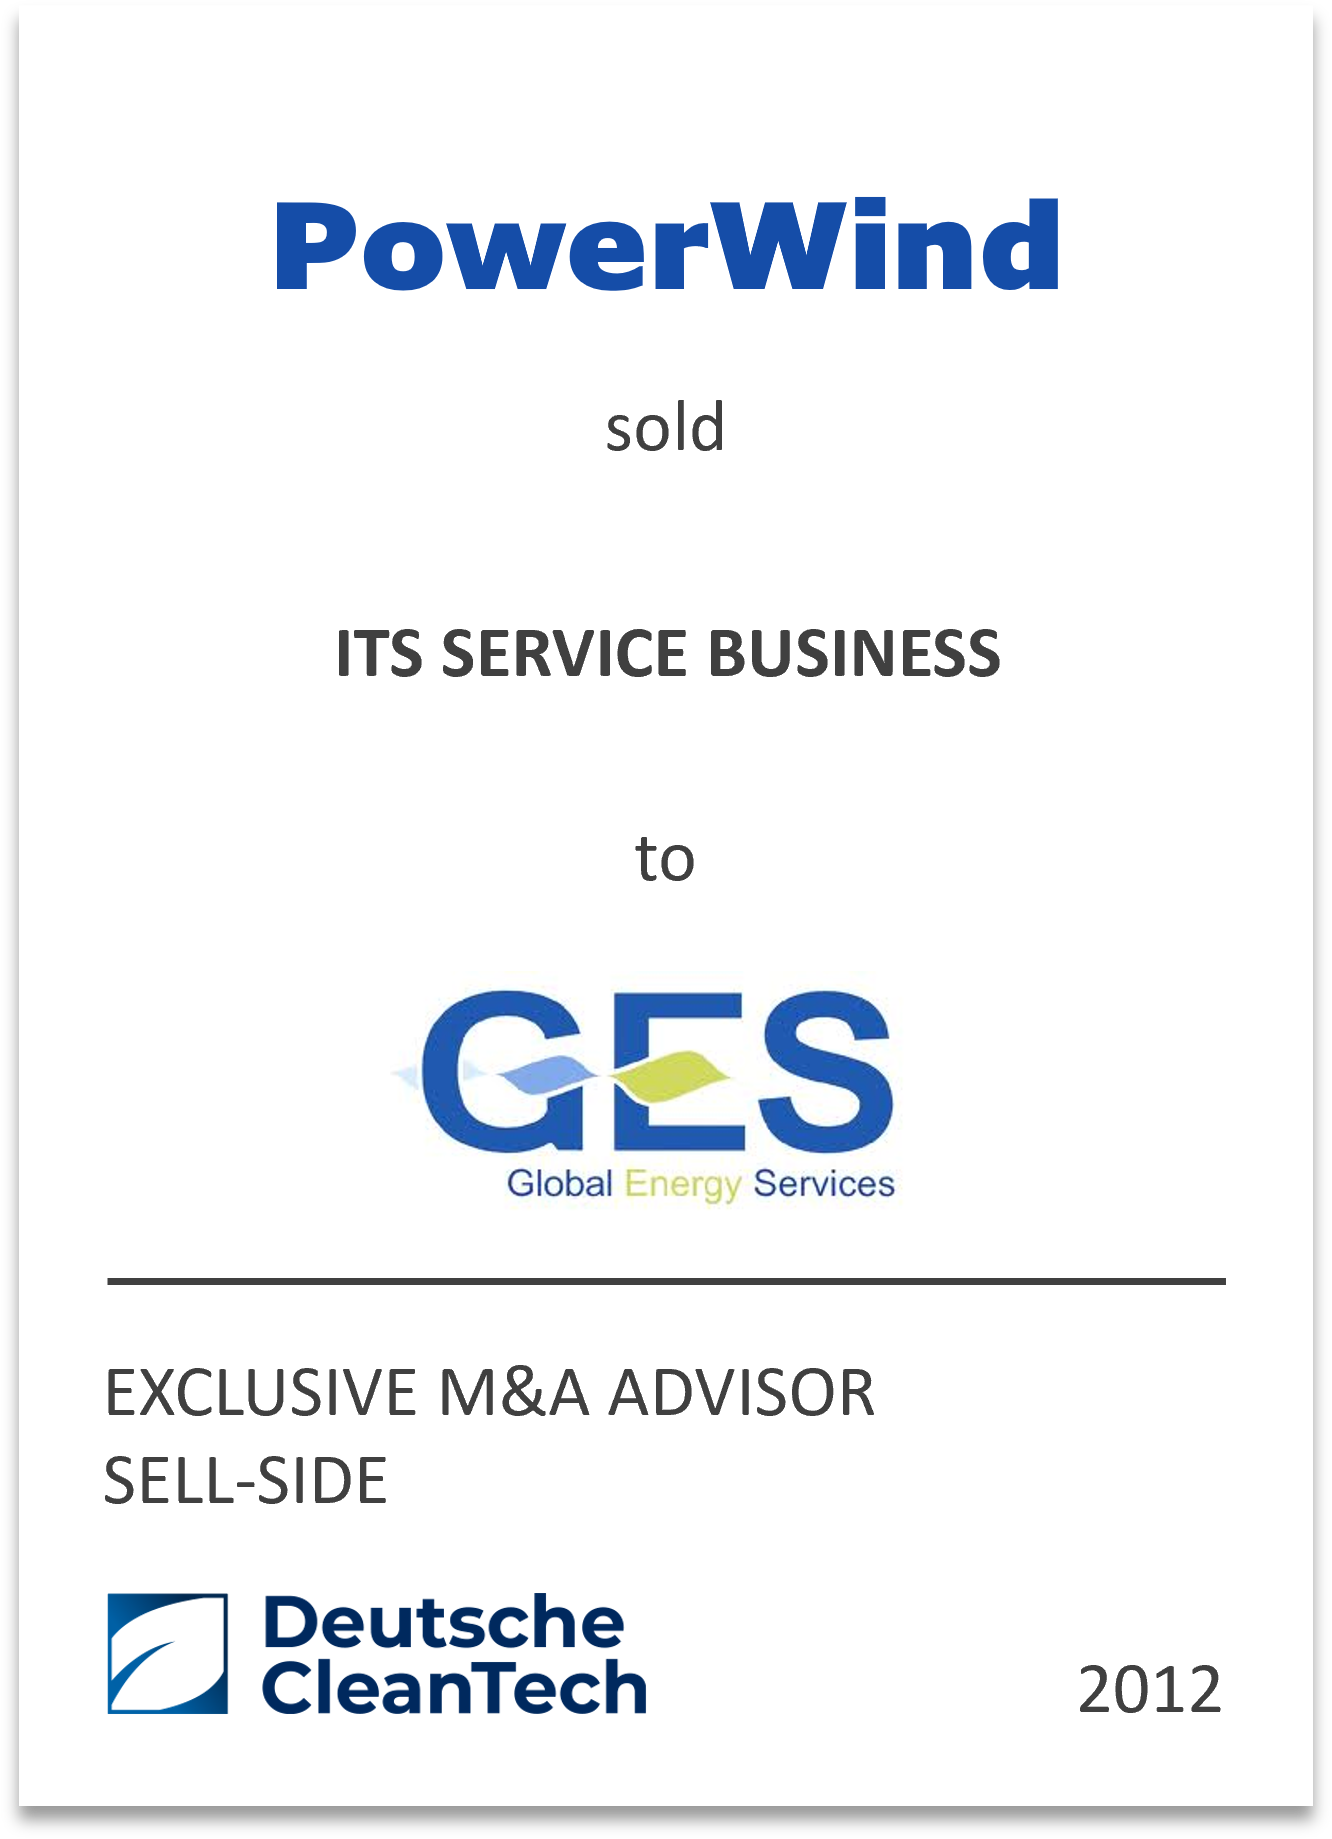 GES Deutschland GmbH, a subsidiary of Global Energy Services Siemsa S.A, has acquired the service division of PowerWind GmbH